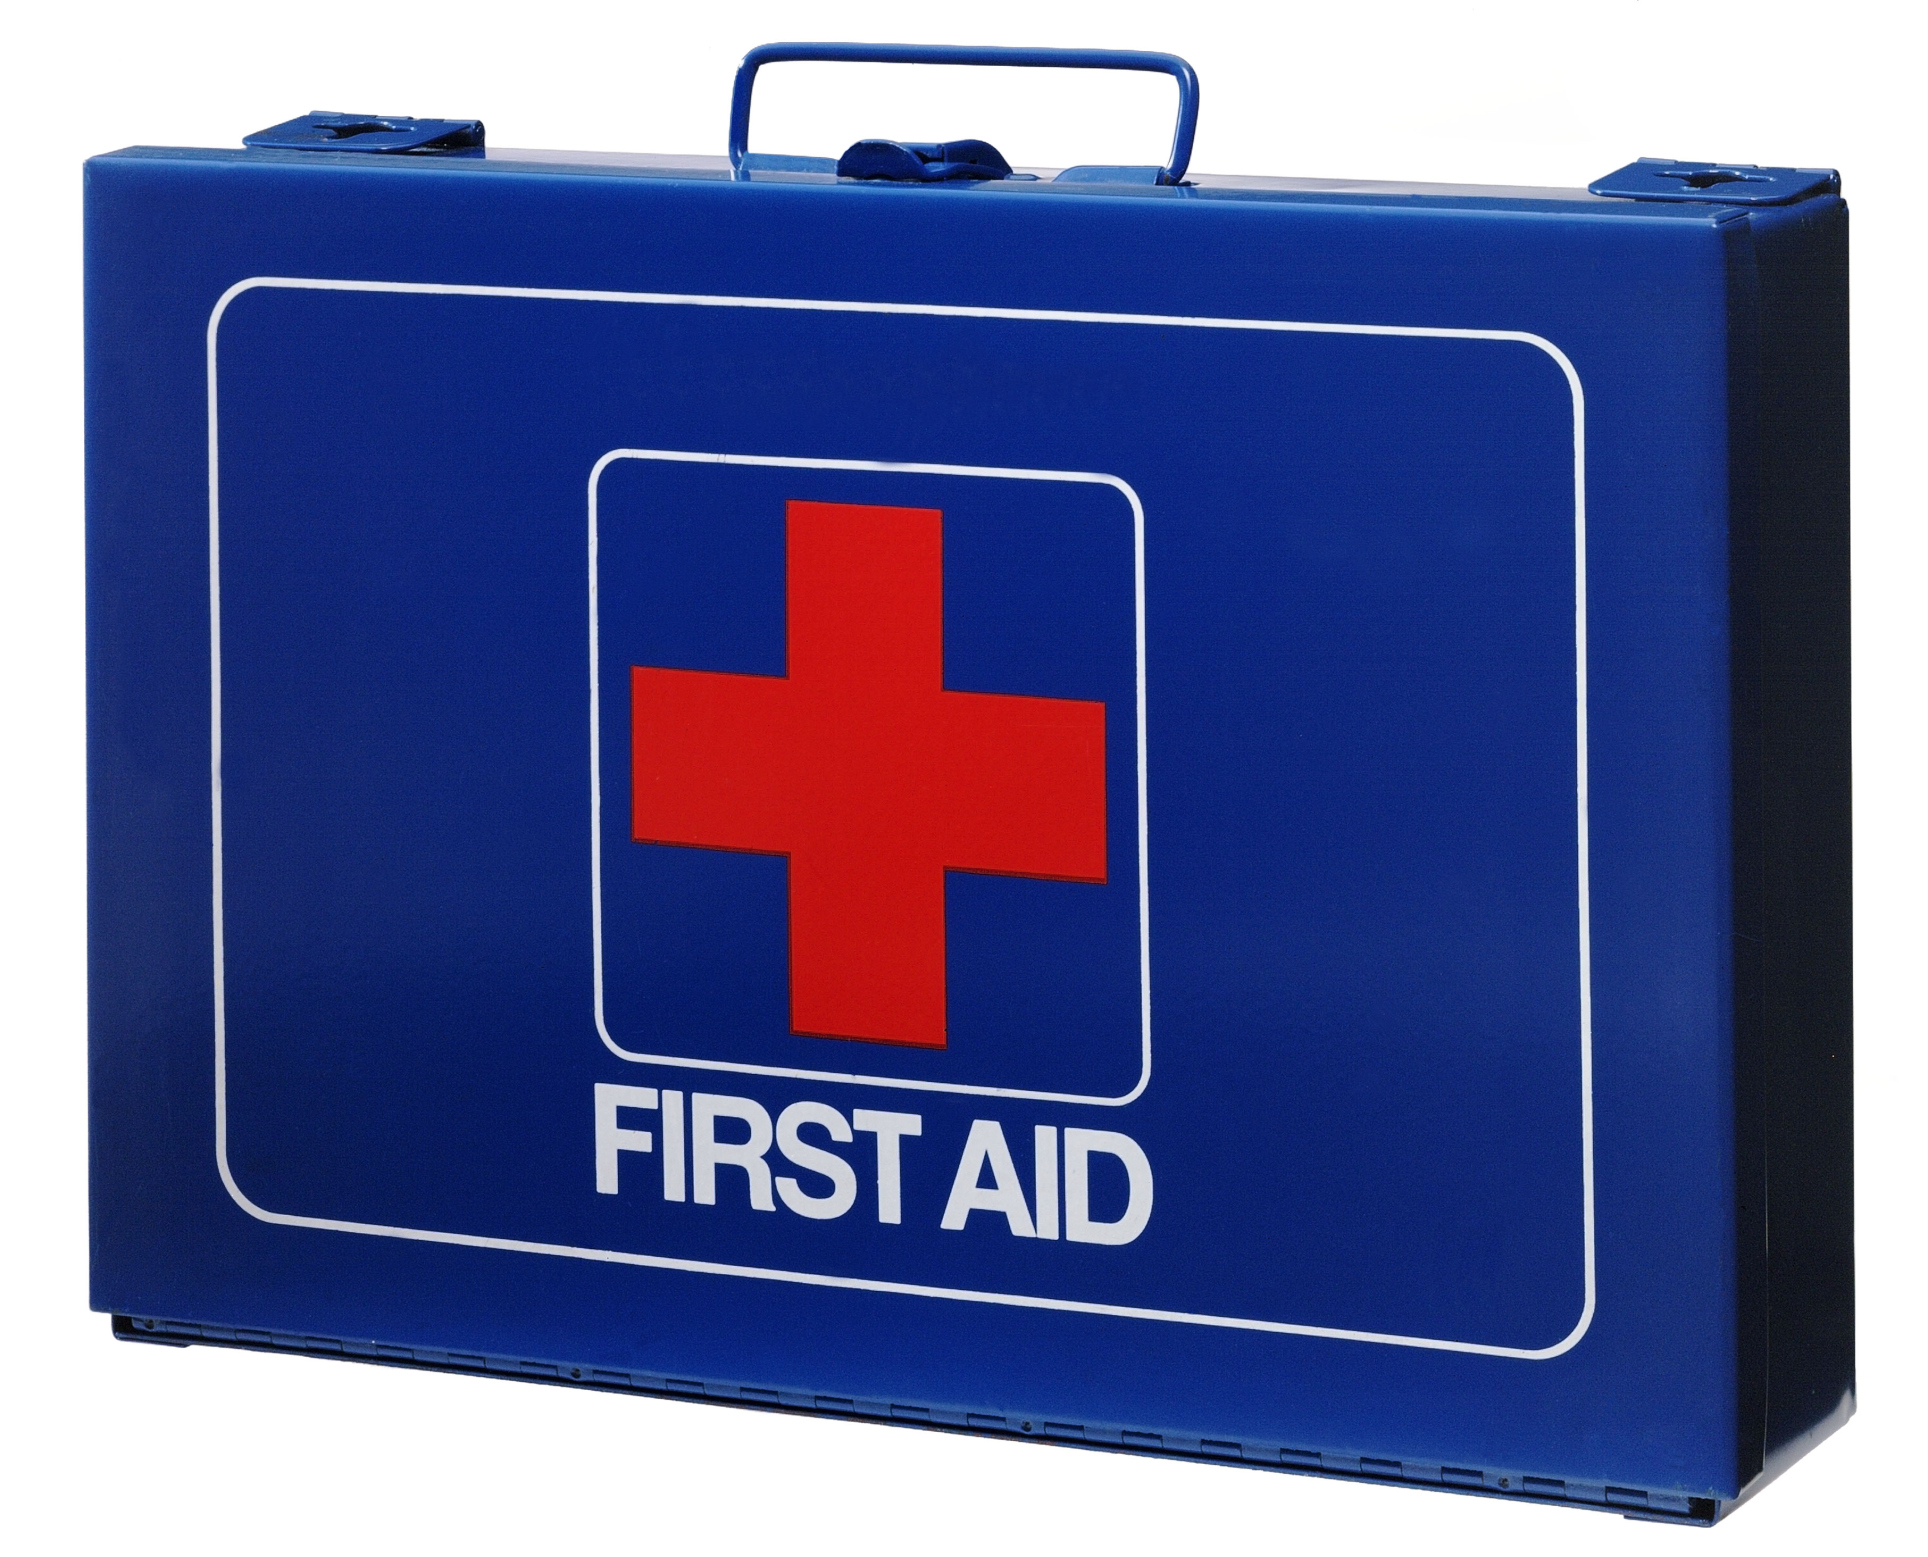 Preparing First Aid For the Zombie Apocalypse | Big Fish Blog